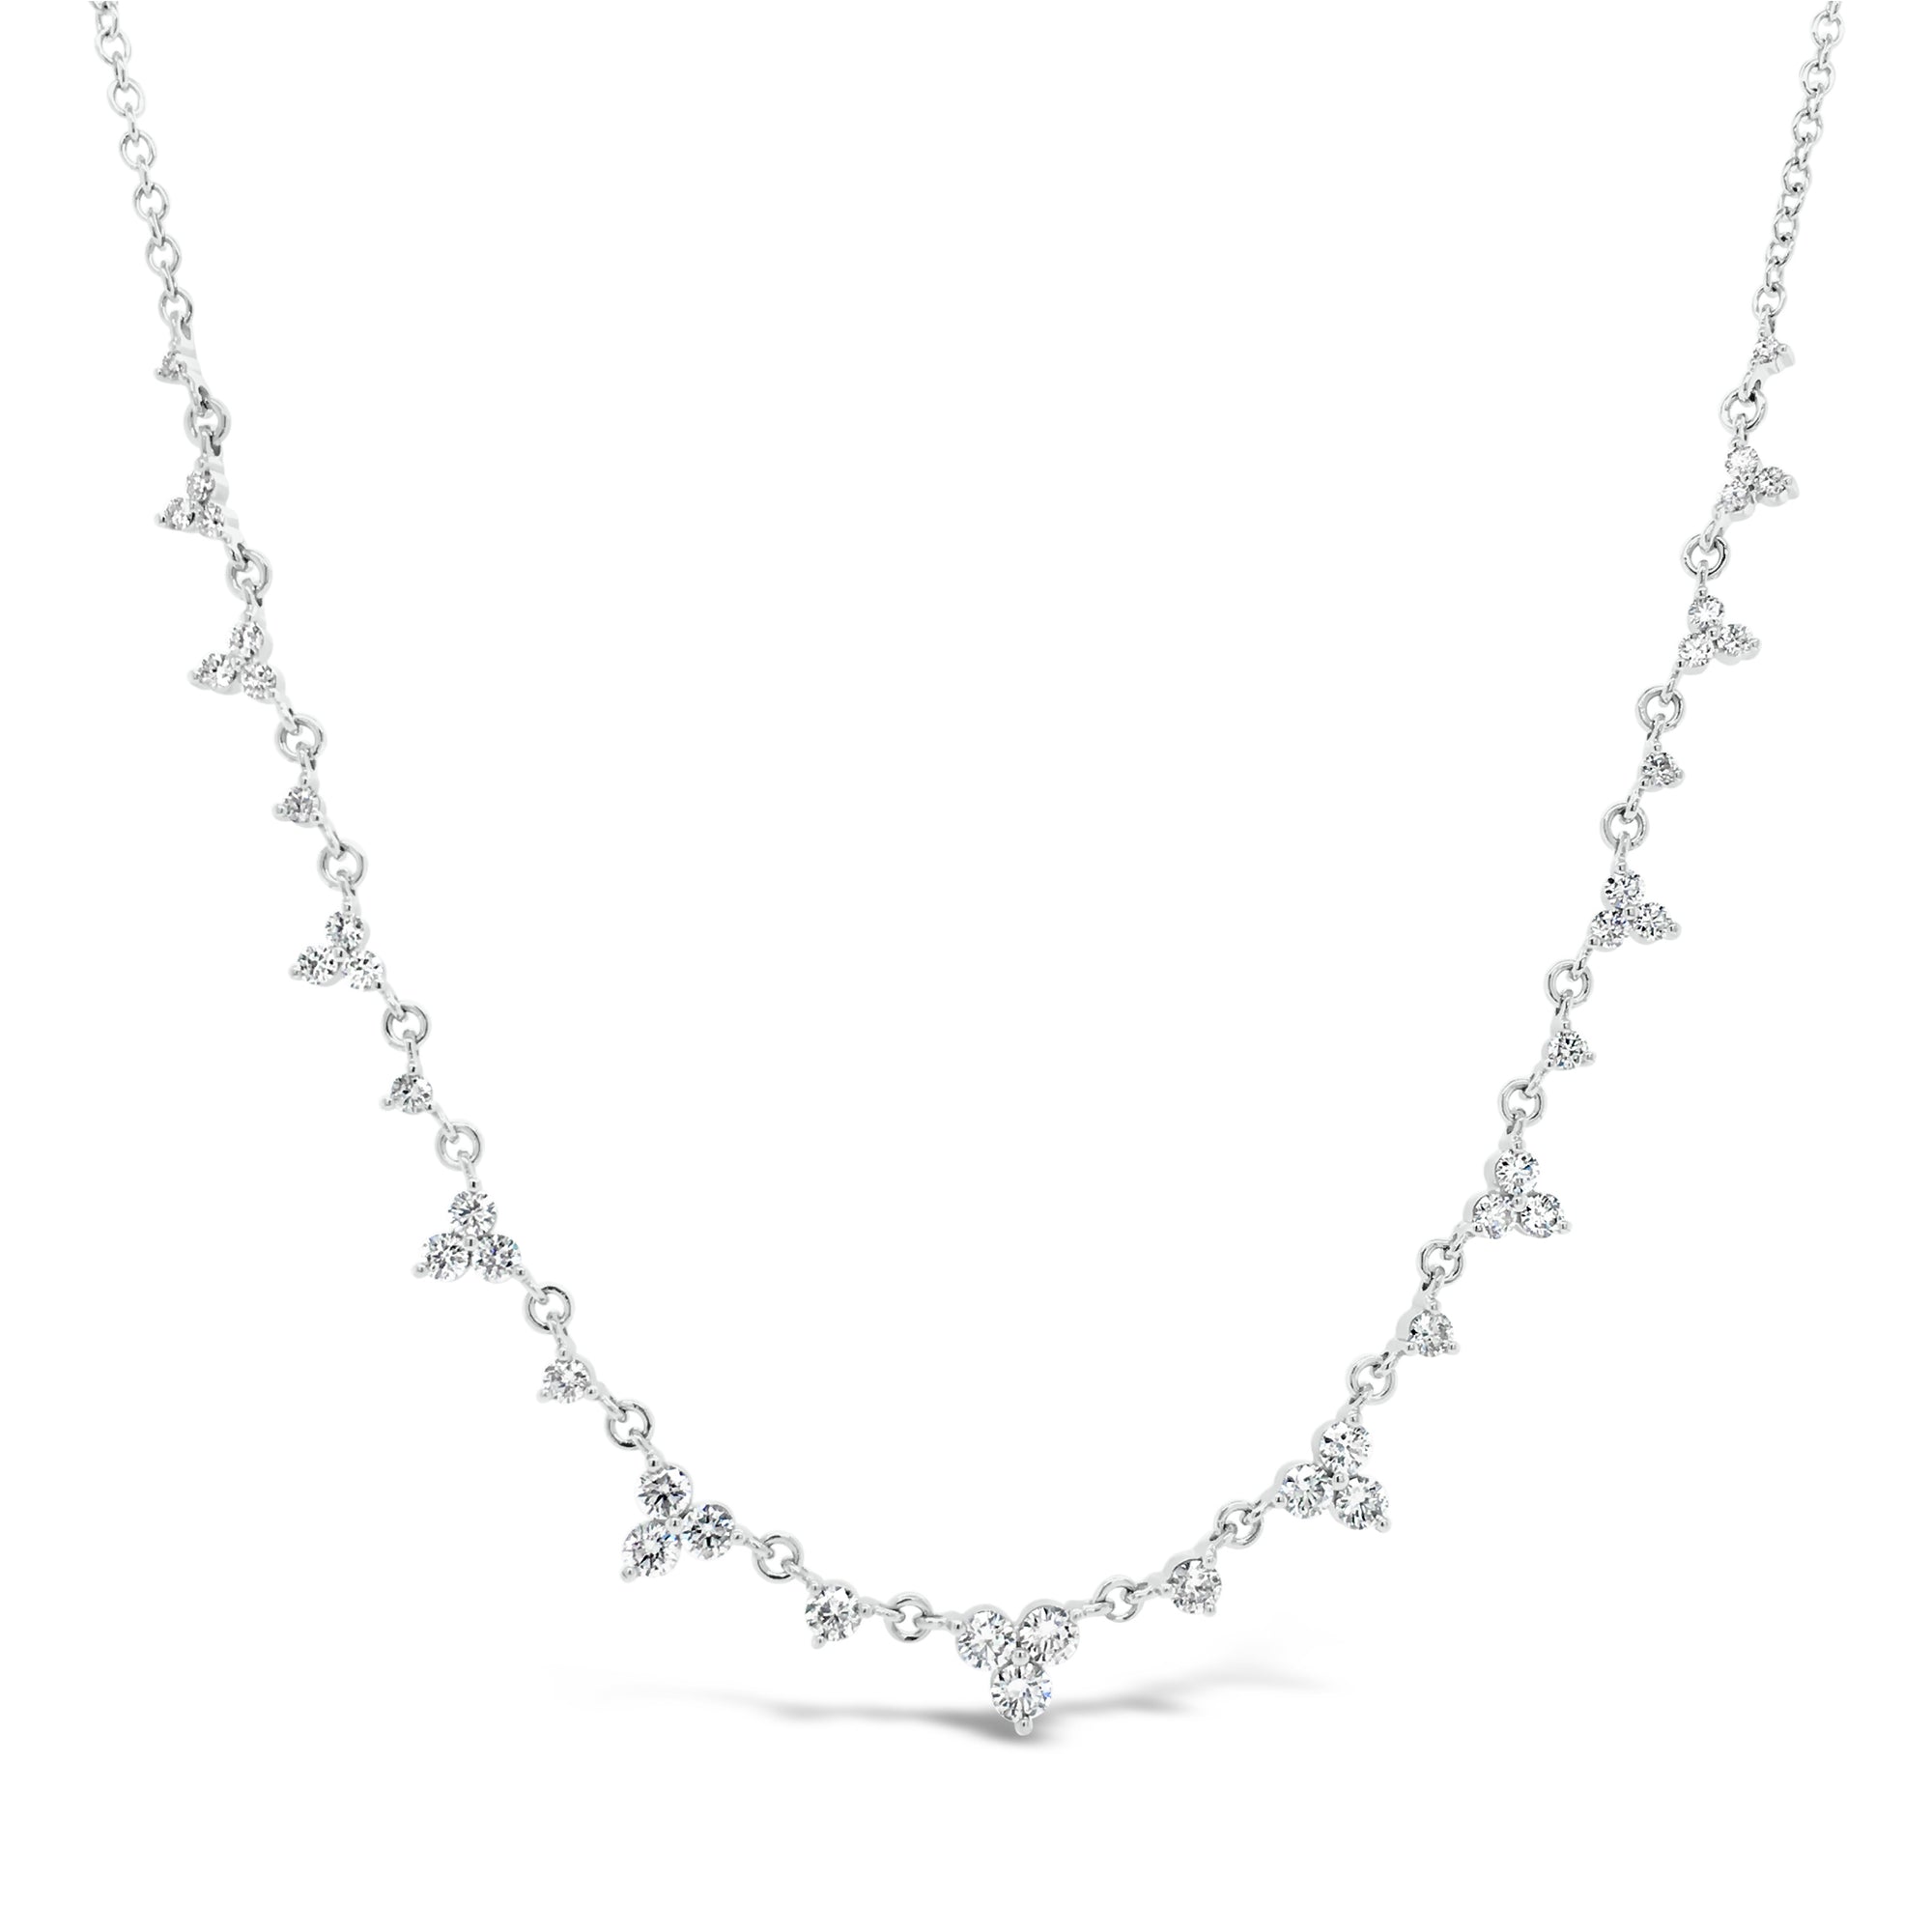 Delicate Diamond Cluster Necklace  - 14K gold weighing 3.87 grams.  - 43 round diamond 0.98 carats.